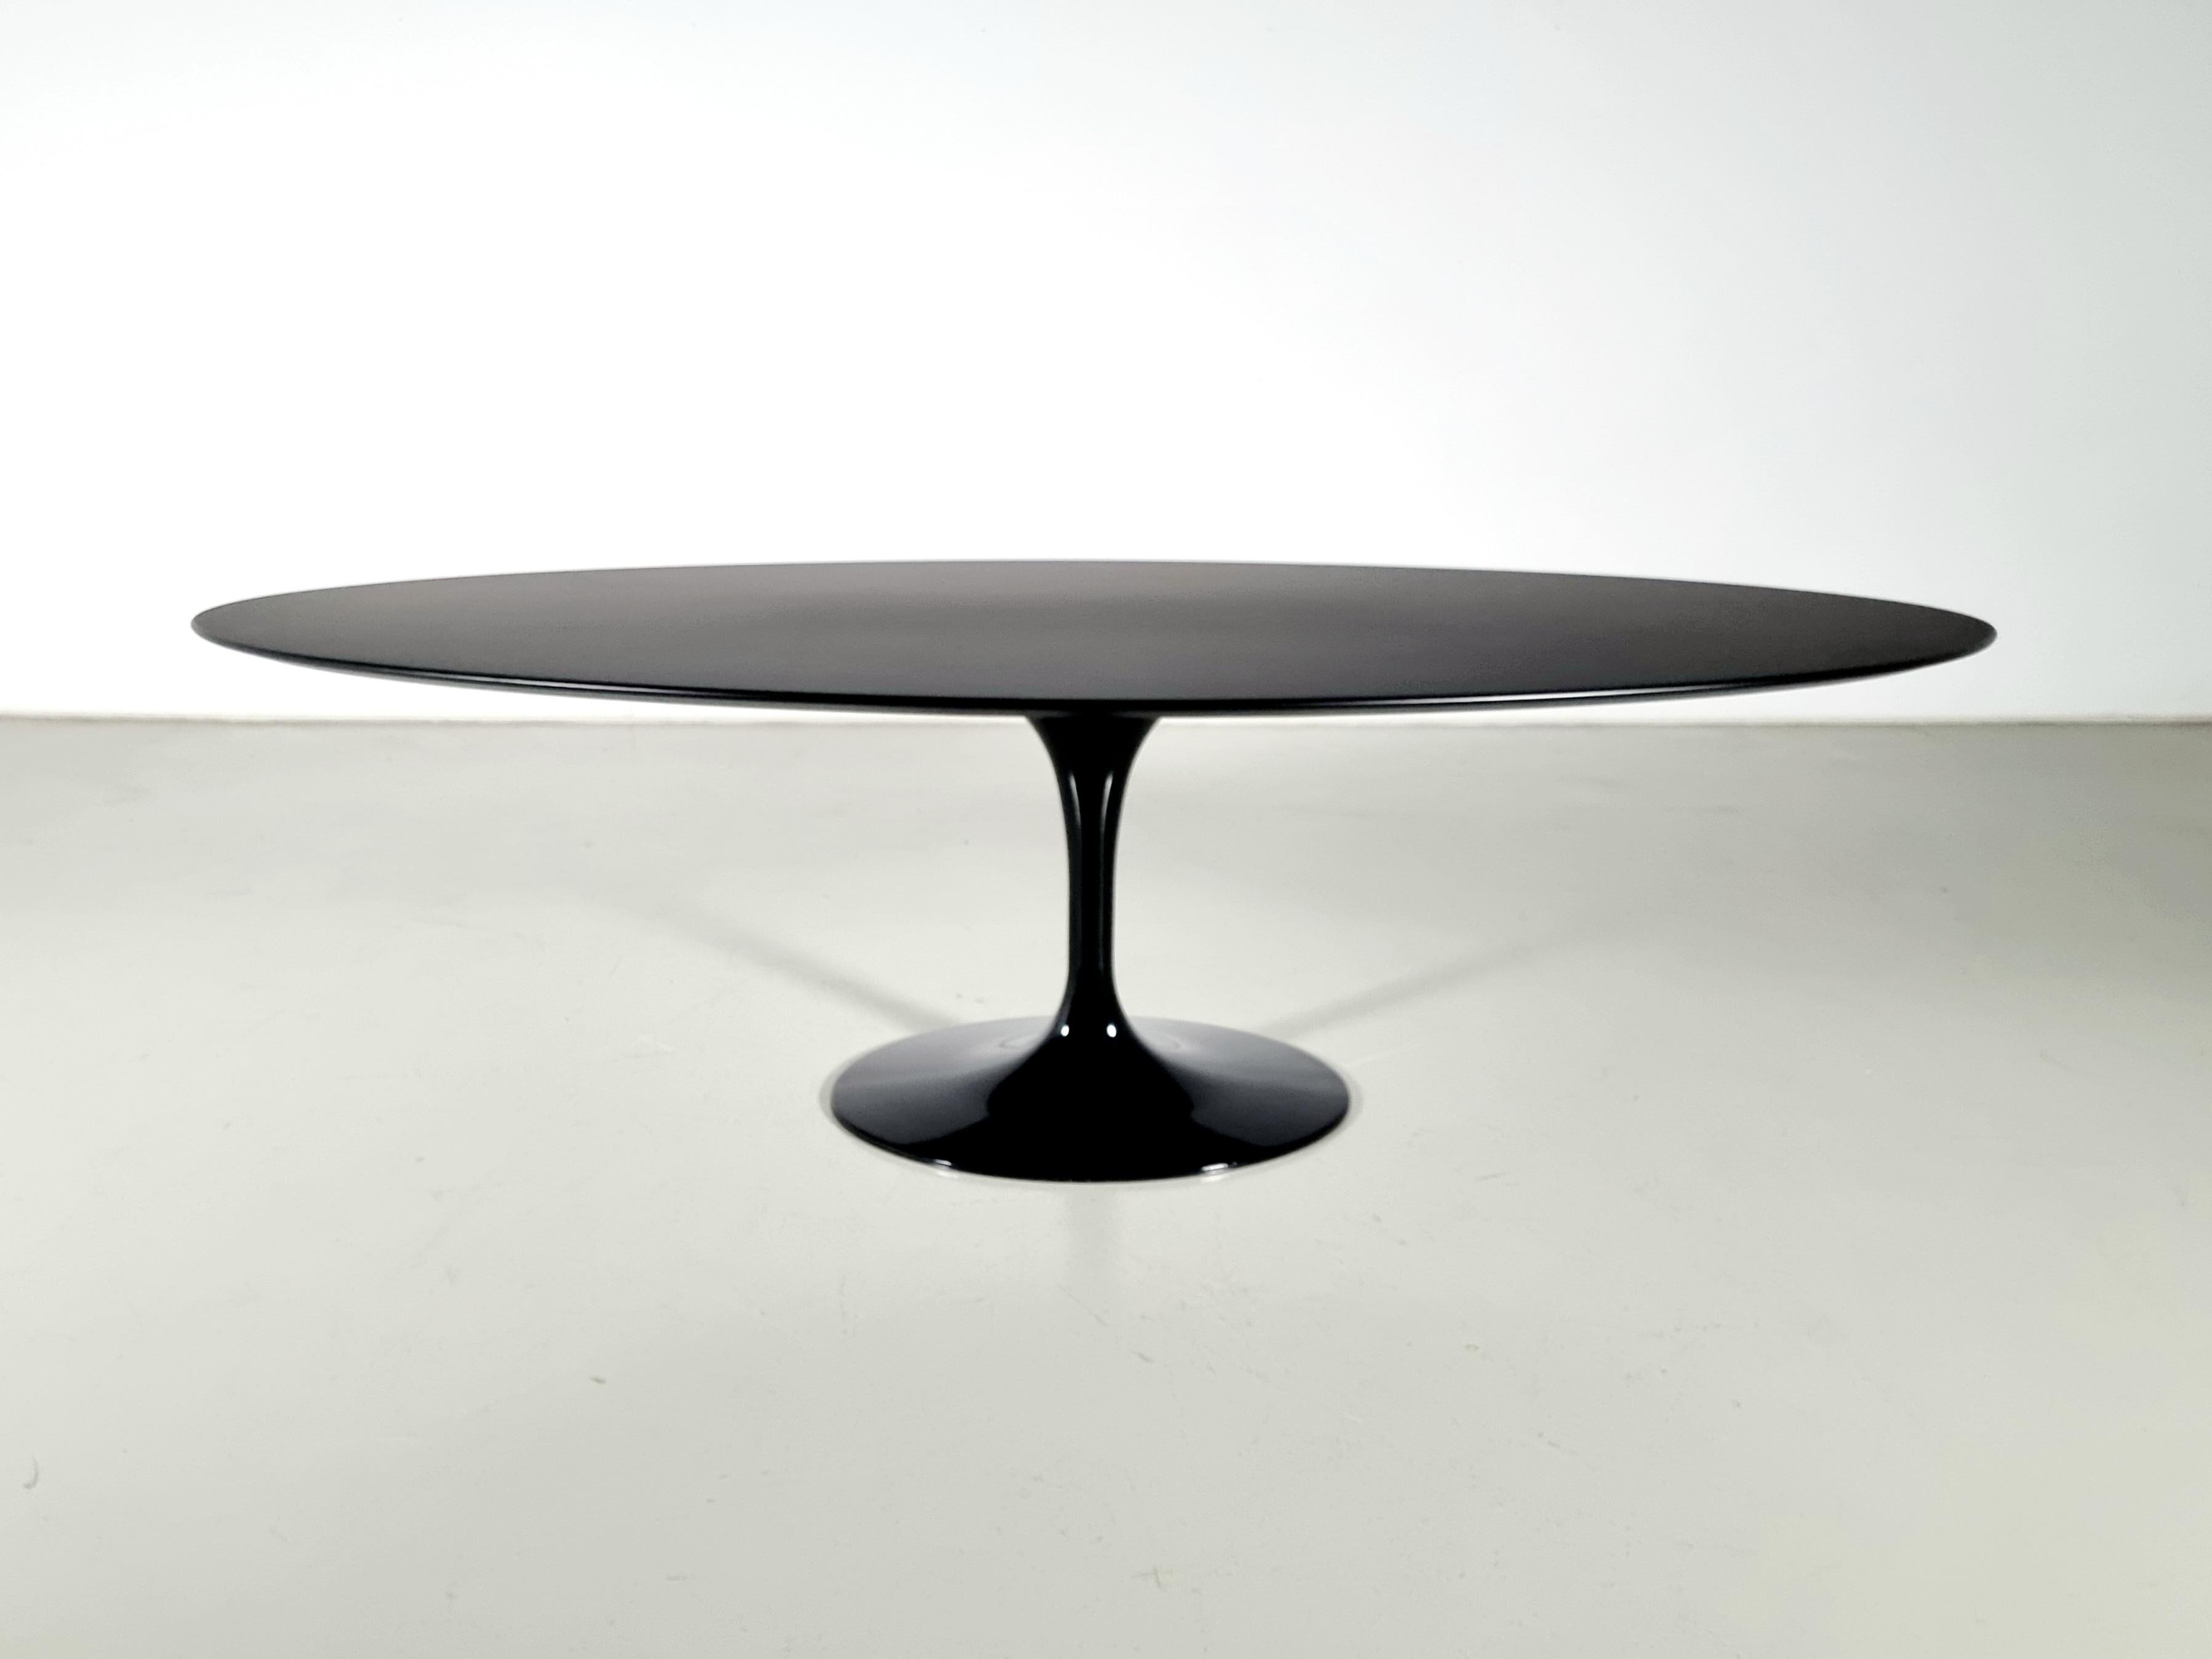 Tulip dining table by Finnish designer Eero Saarinen for Knoll International. The table has a beautiful black smooth laminate top and black base, marked.

The Knoll International Saarinen dining table was created between 1955 and 1957 and is based